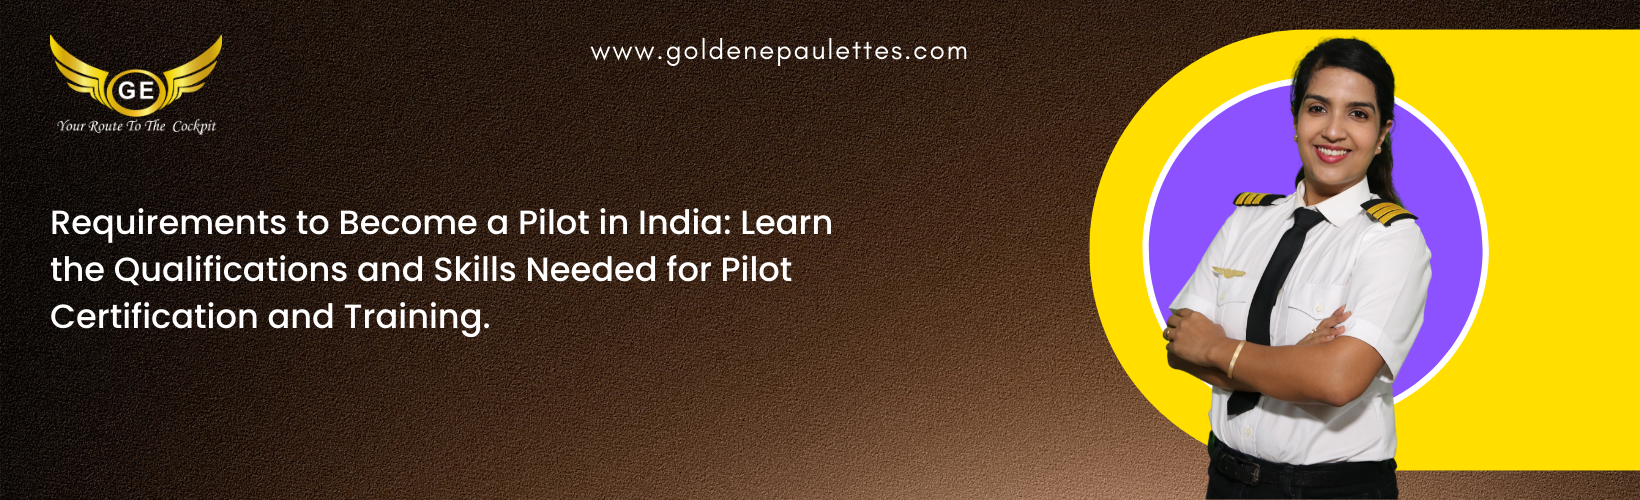 What are the Requirements for Becoming a Pilot in India